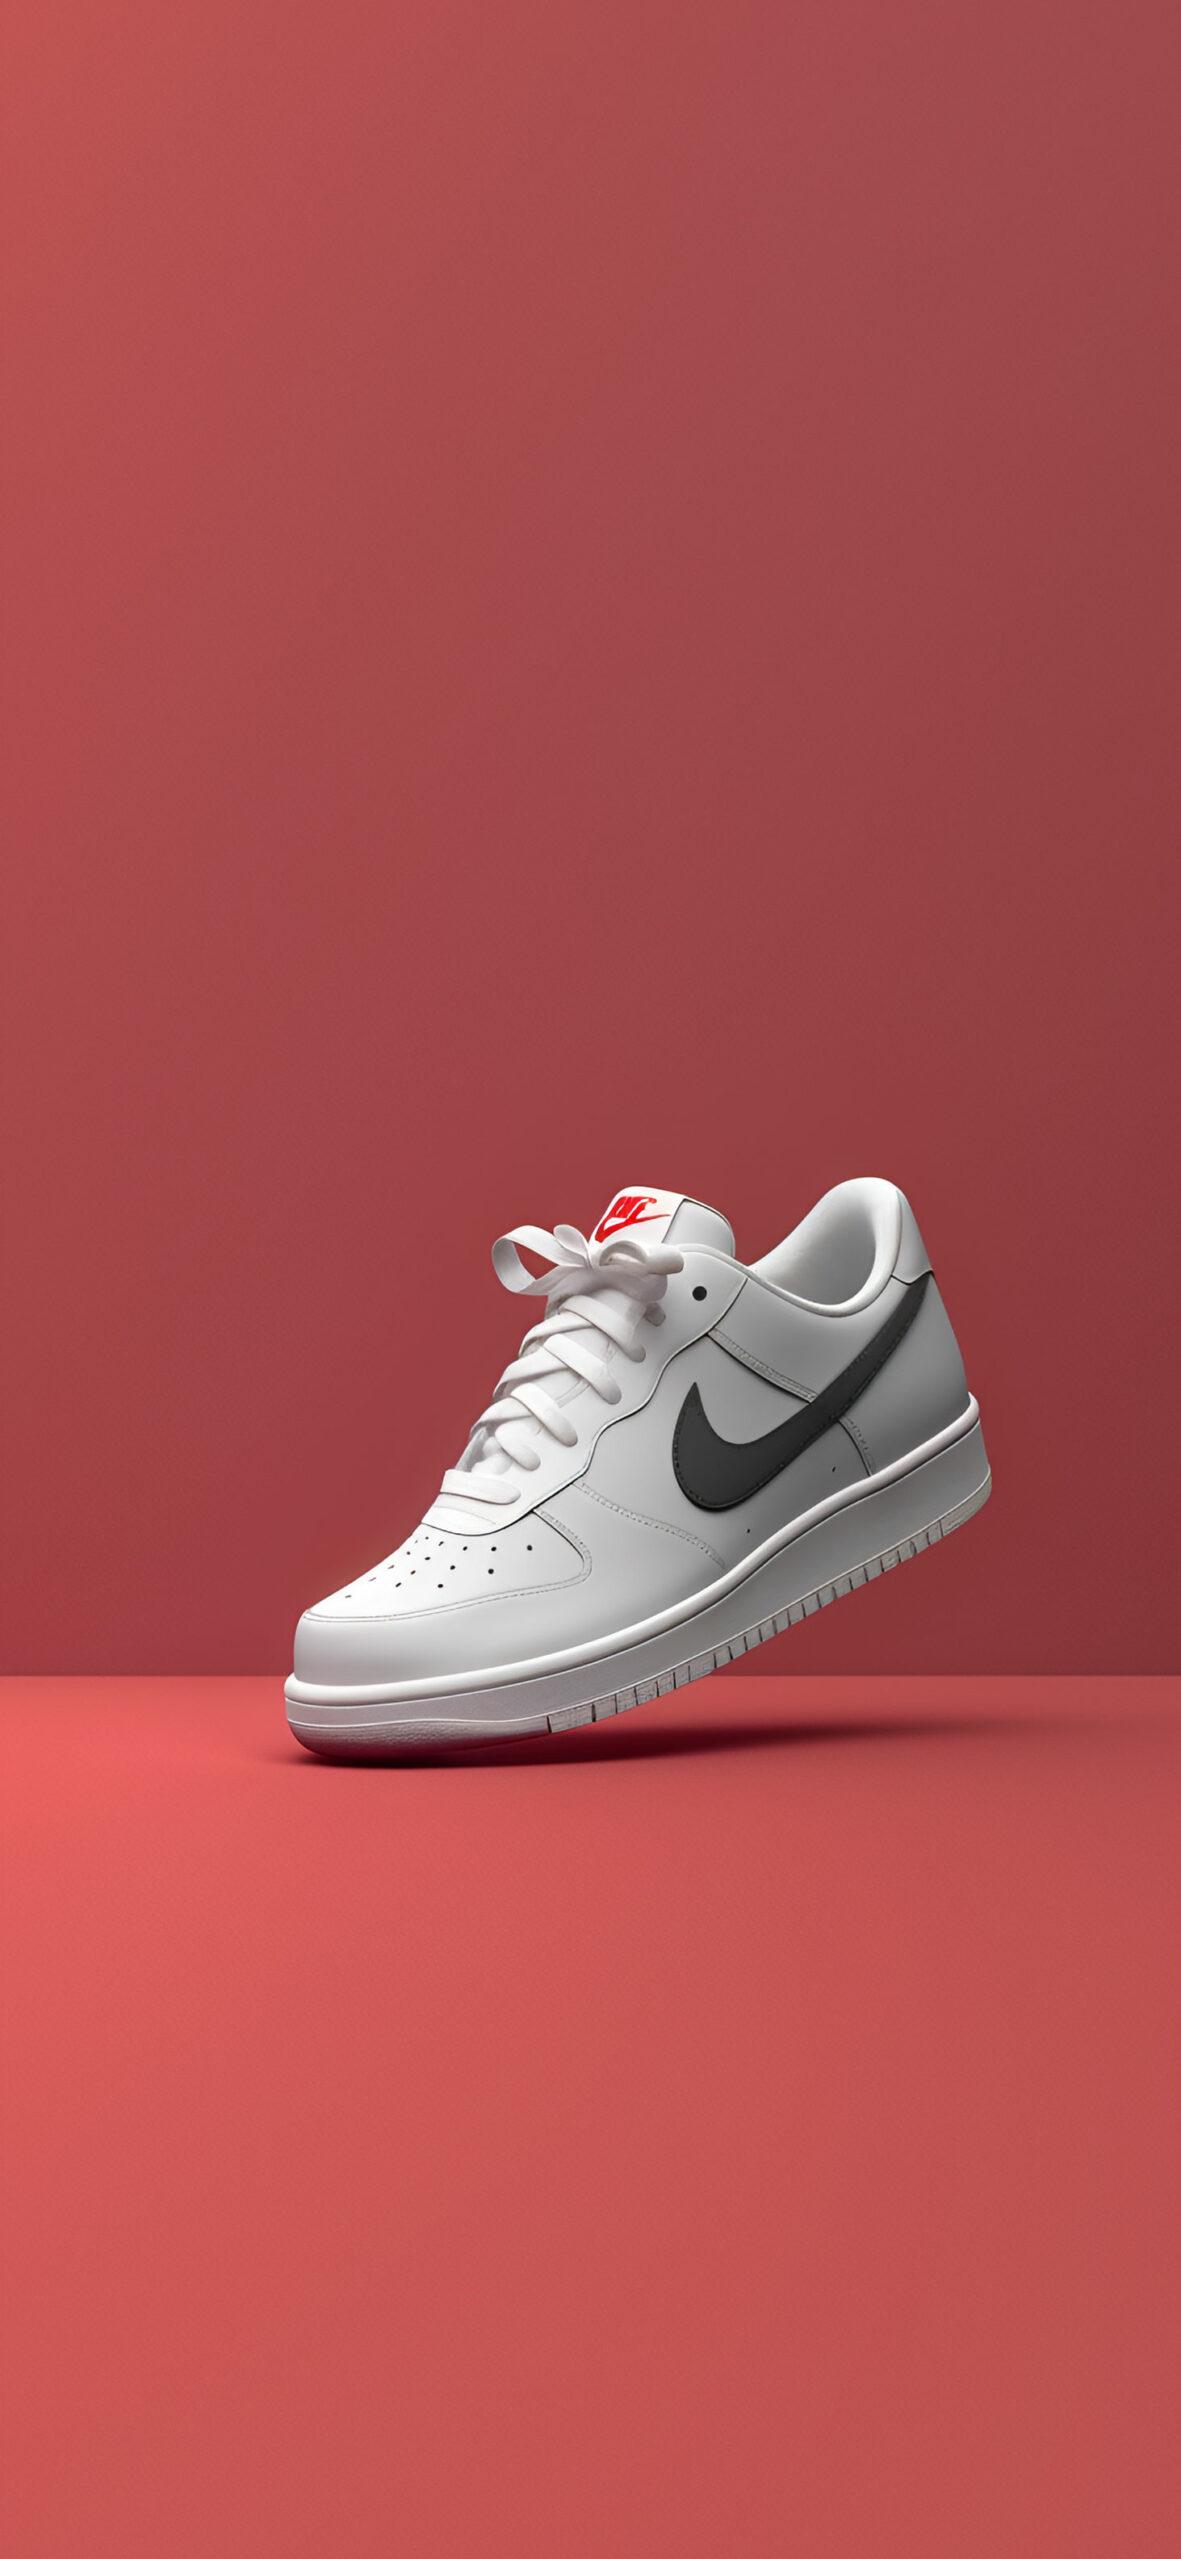 White Nike Air Force Red Wallpaper For iPhone